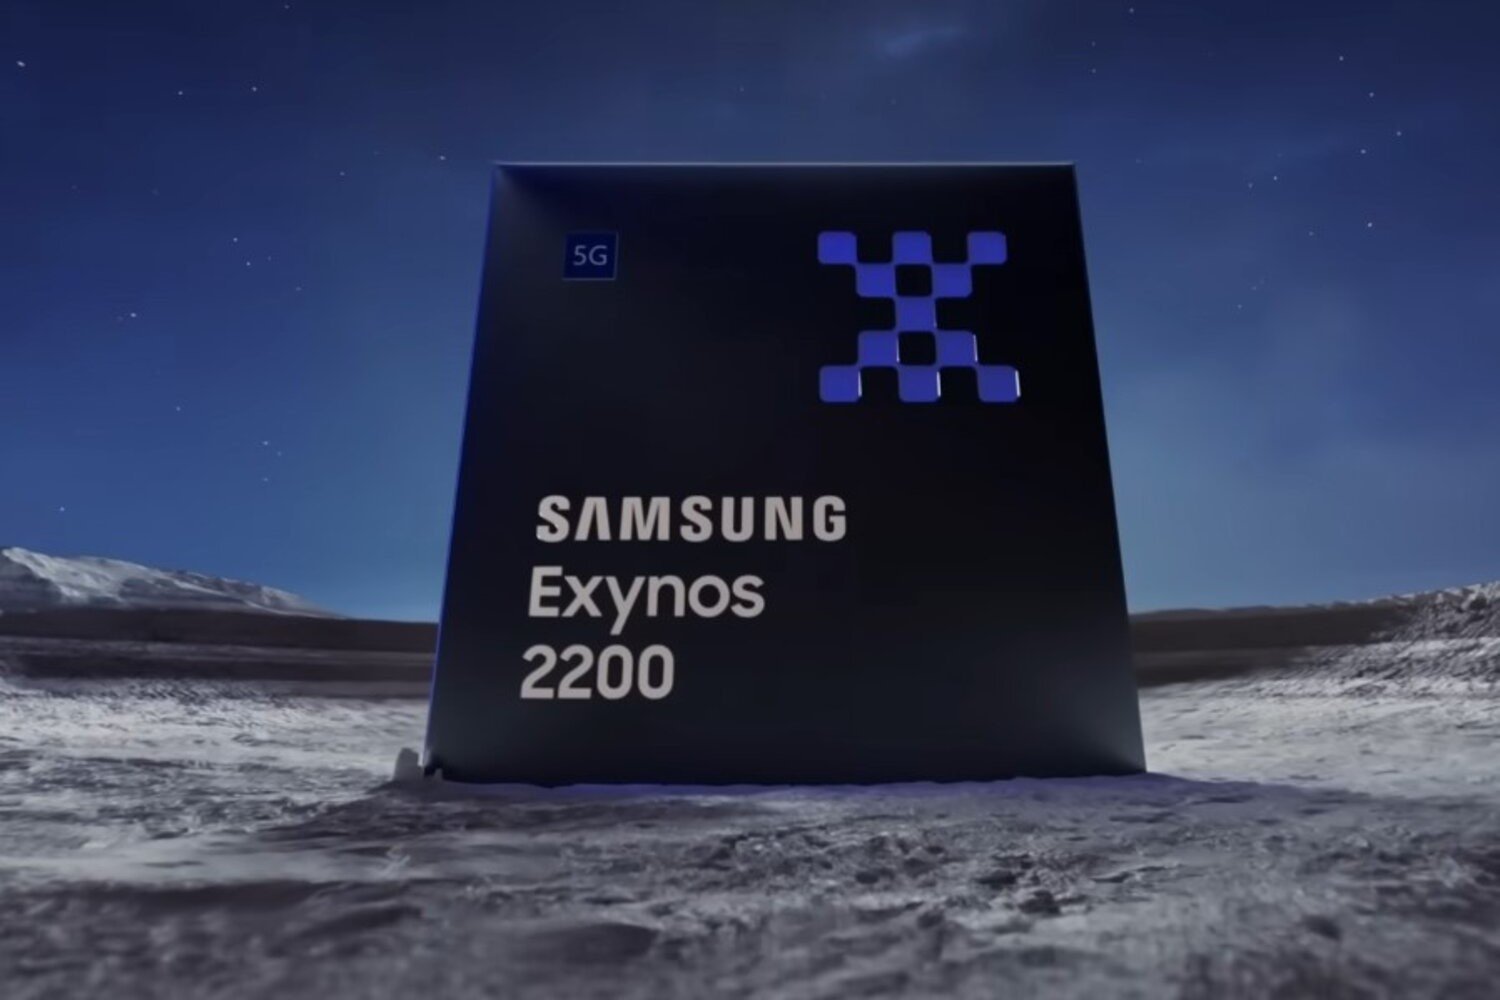 Will Exynos processors soon be liberated from AMD GPUs?